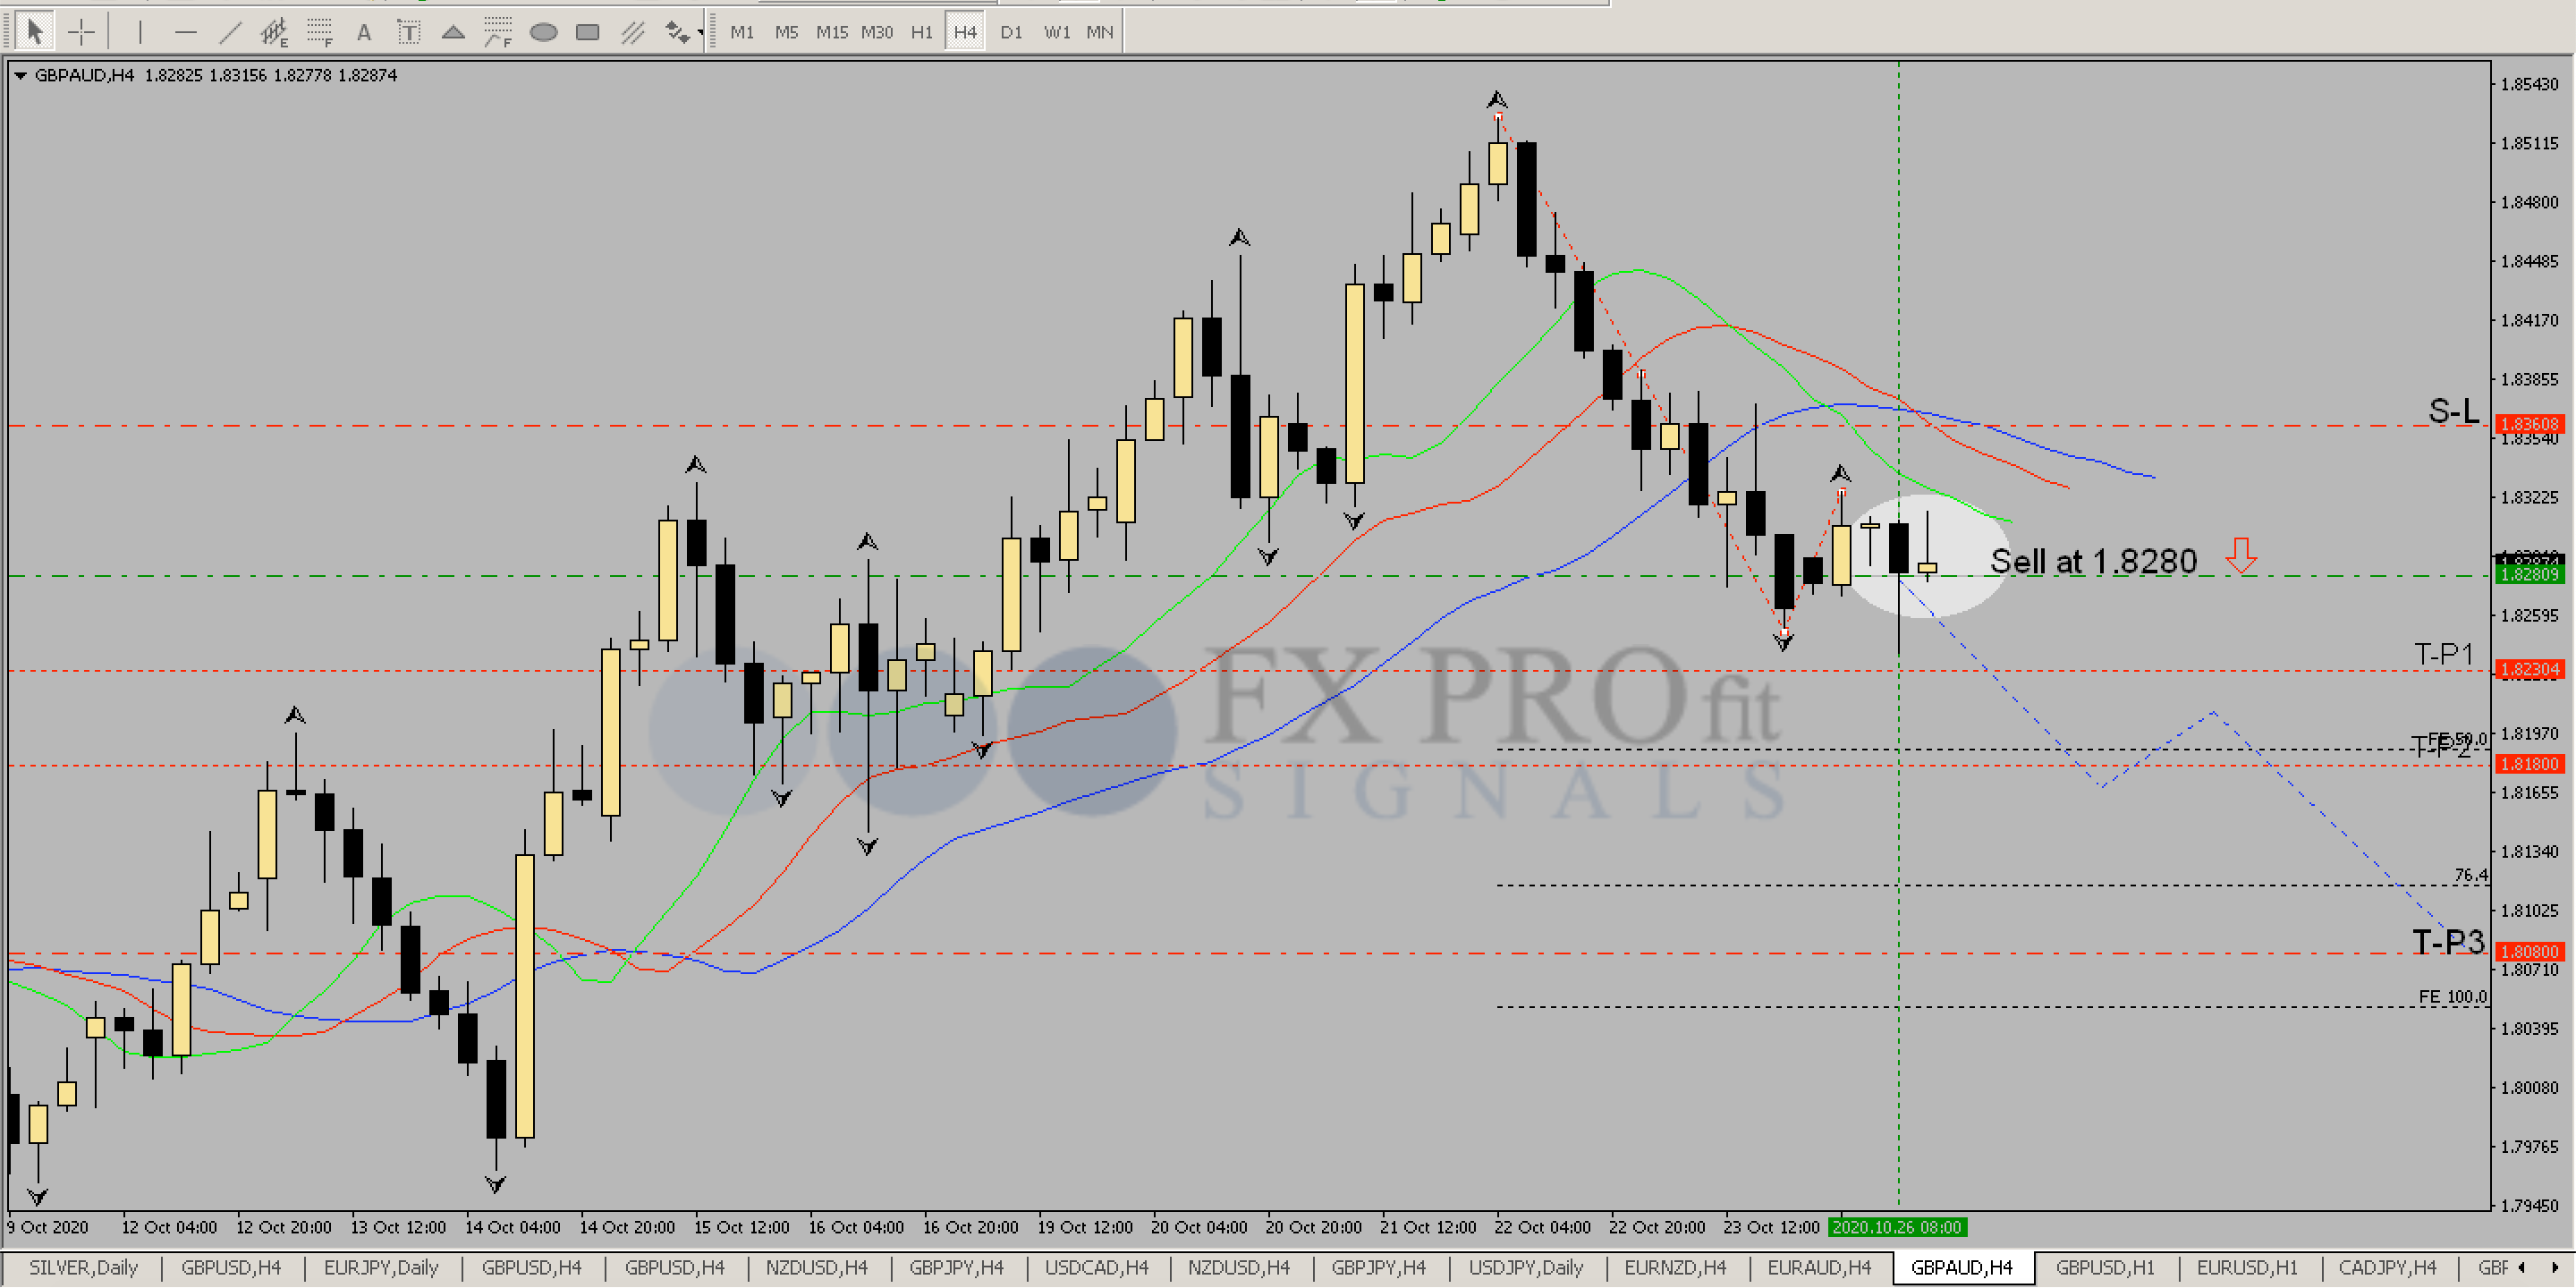 Free Signal 26.10.2020 "GBP/AUD sell" - details - Forex ...